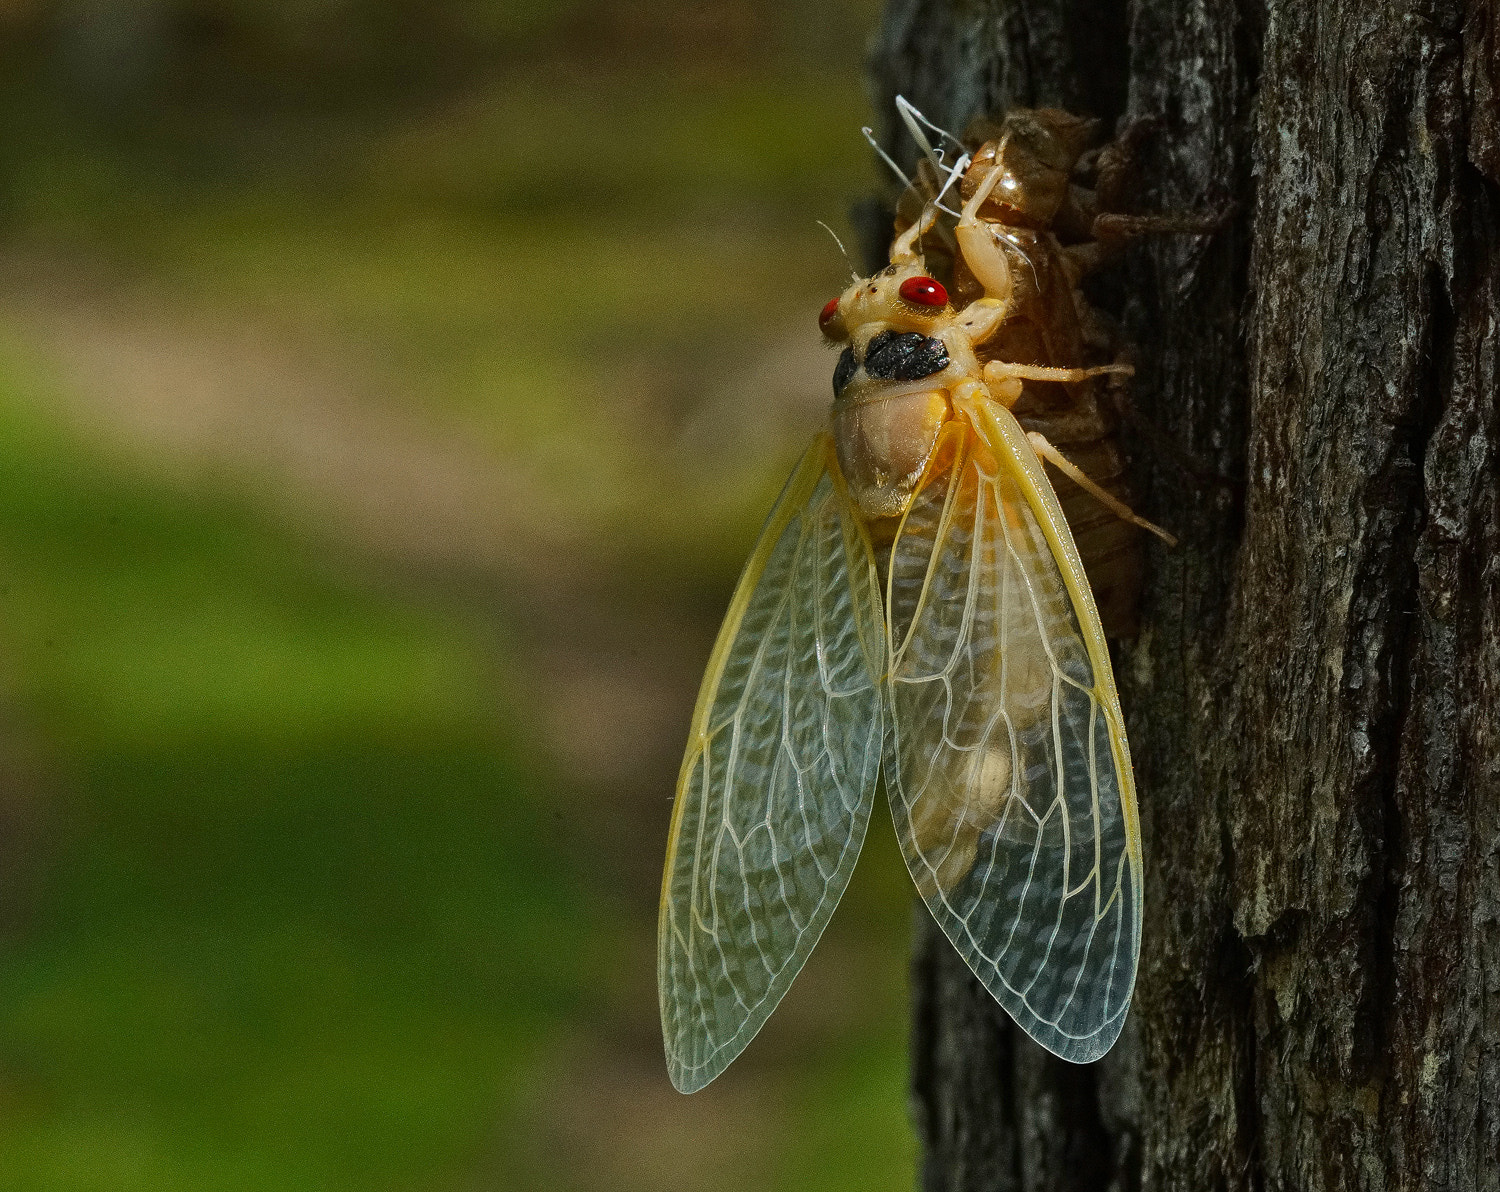 100mm F2.8 SSM sample photo. Cicada-almost there -8 photography